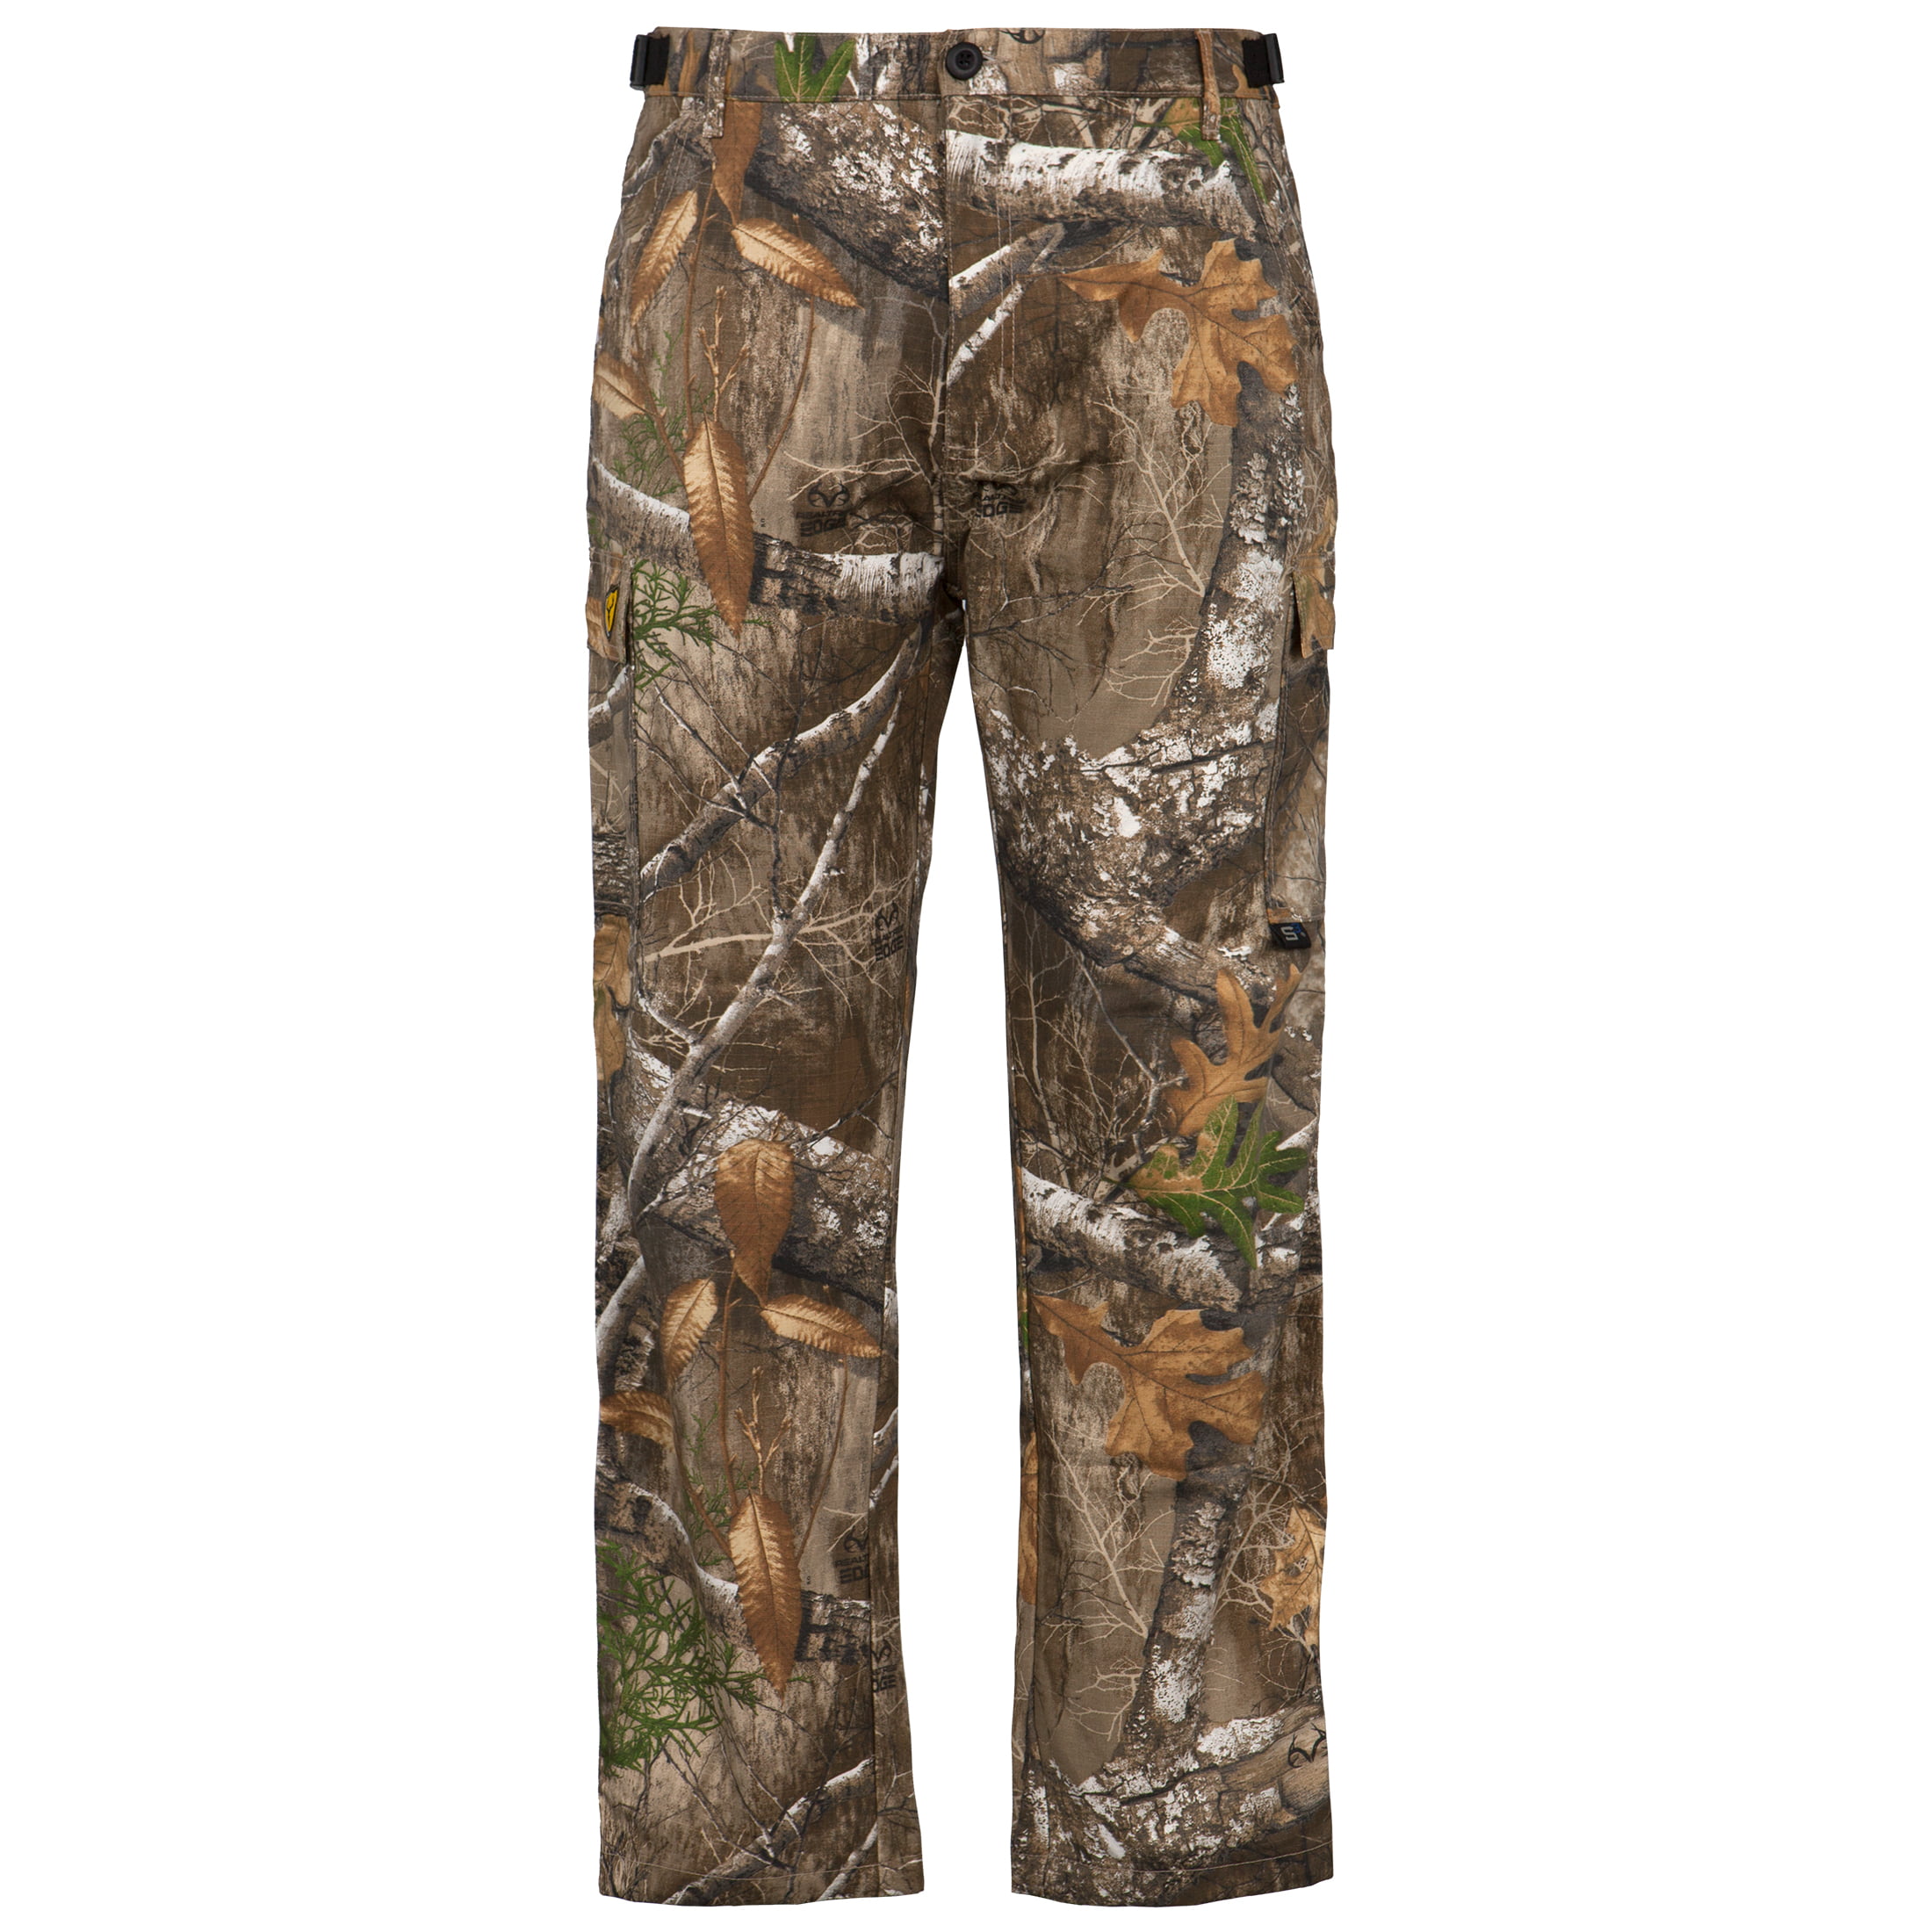 NWT Mossy Oak Mountain Country Hunting Cargo Pants Men's XL 40-42 